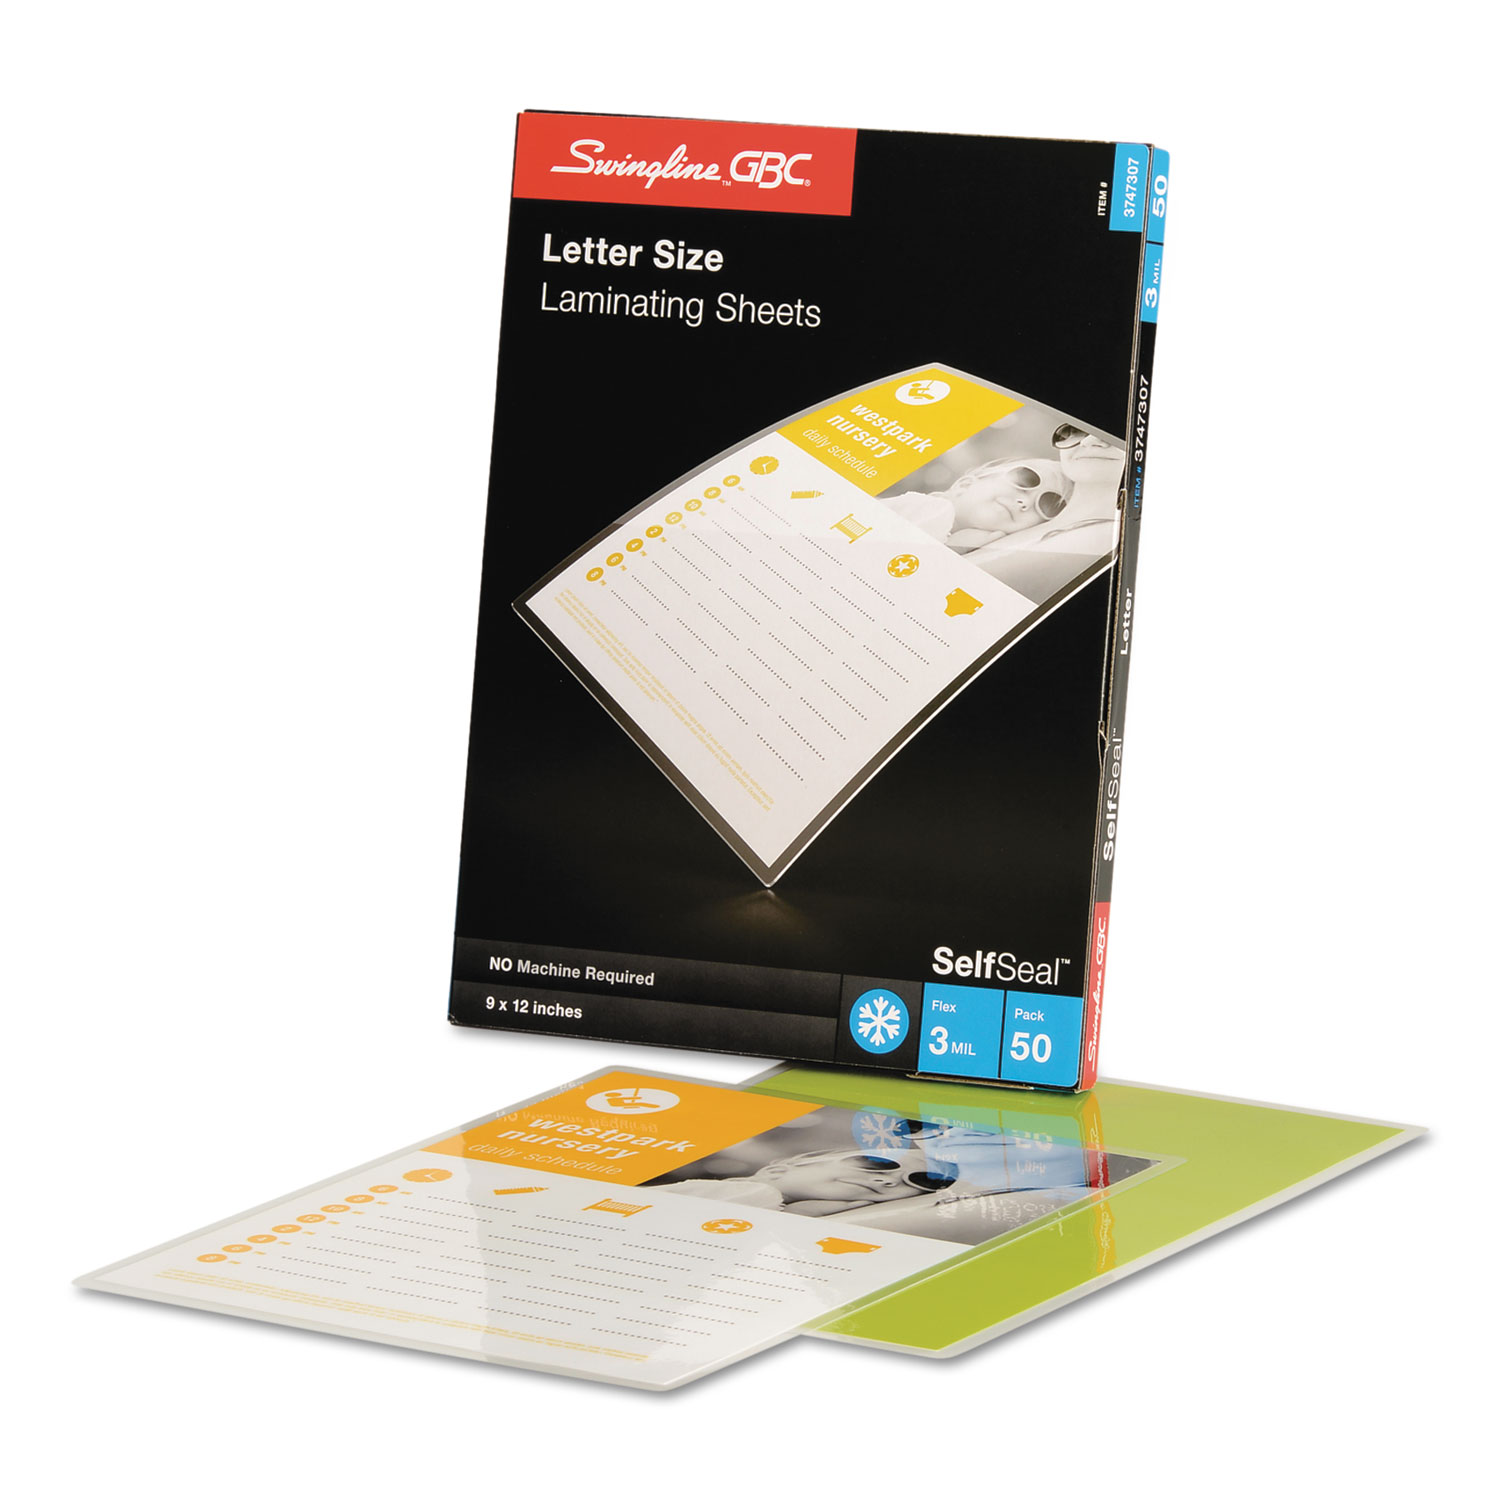 SelfSeal Single-Sided Letter-Size Laminating Sheets, 3mil, 9 x 12, 50/Pack